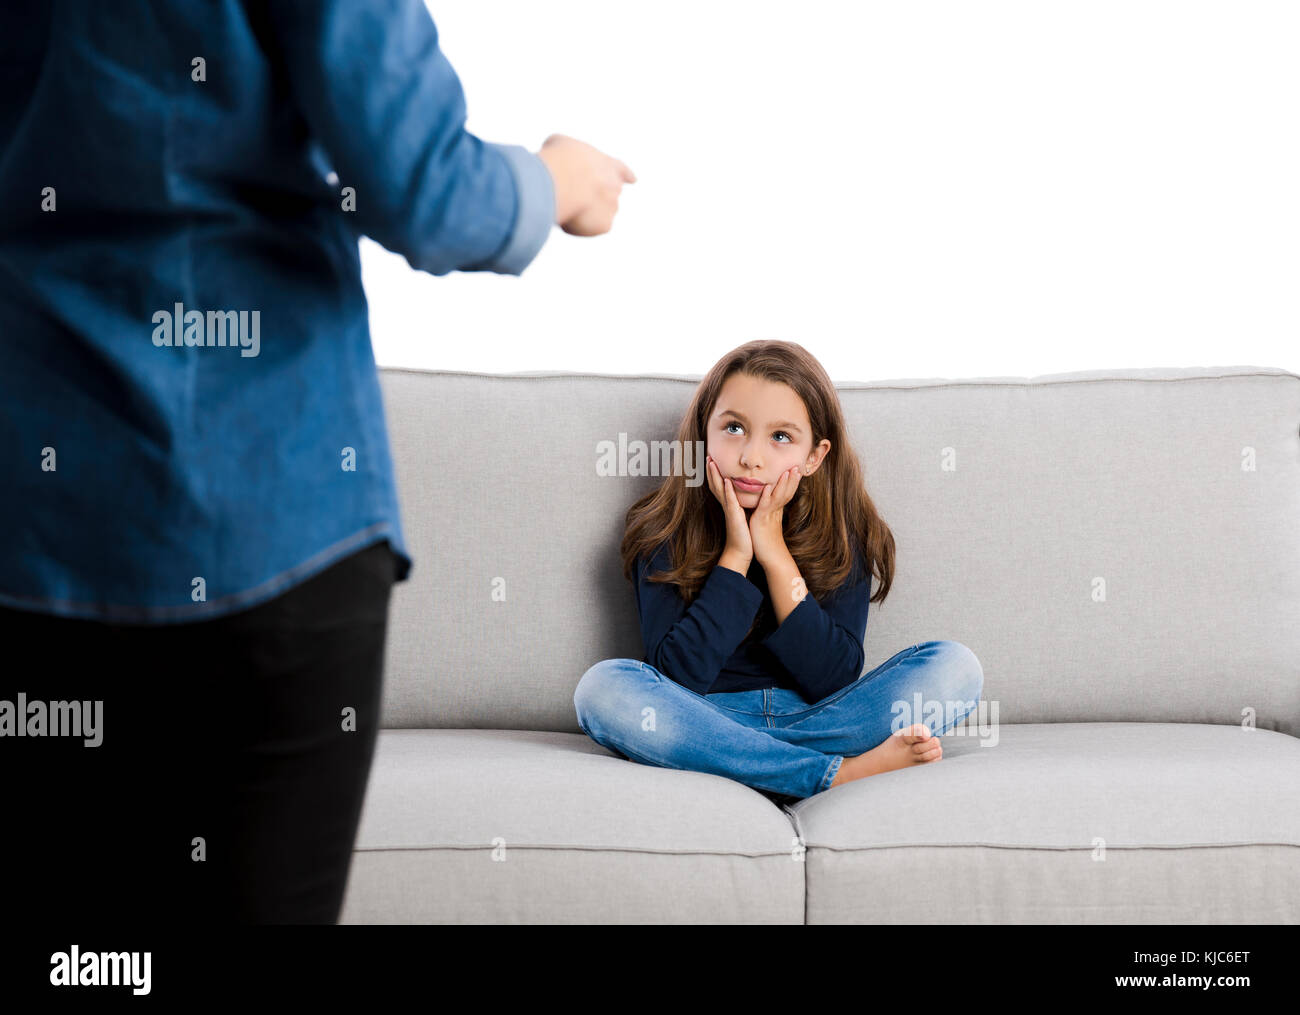 Grown up rebuking a little child for bad behavior Stock Photo